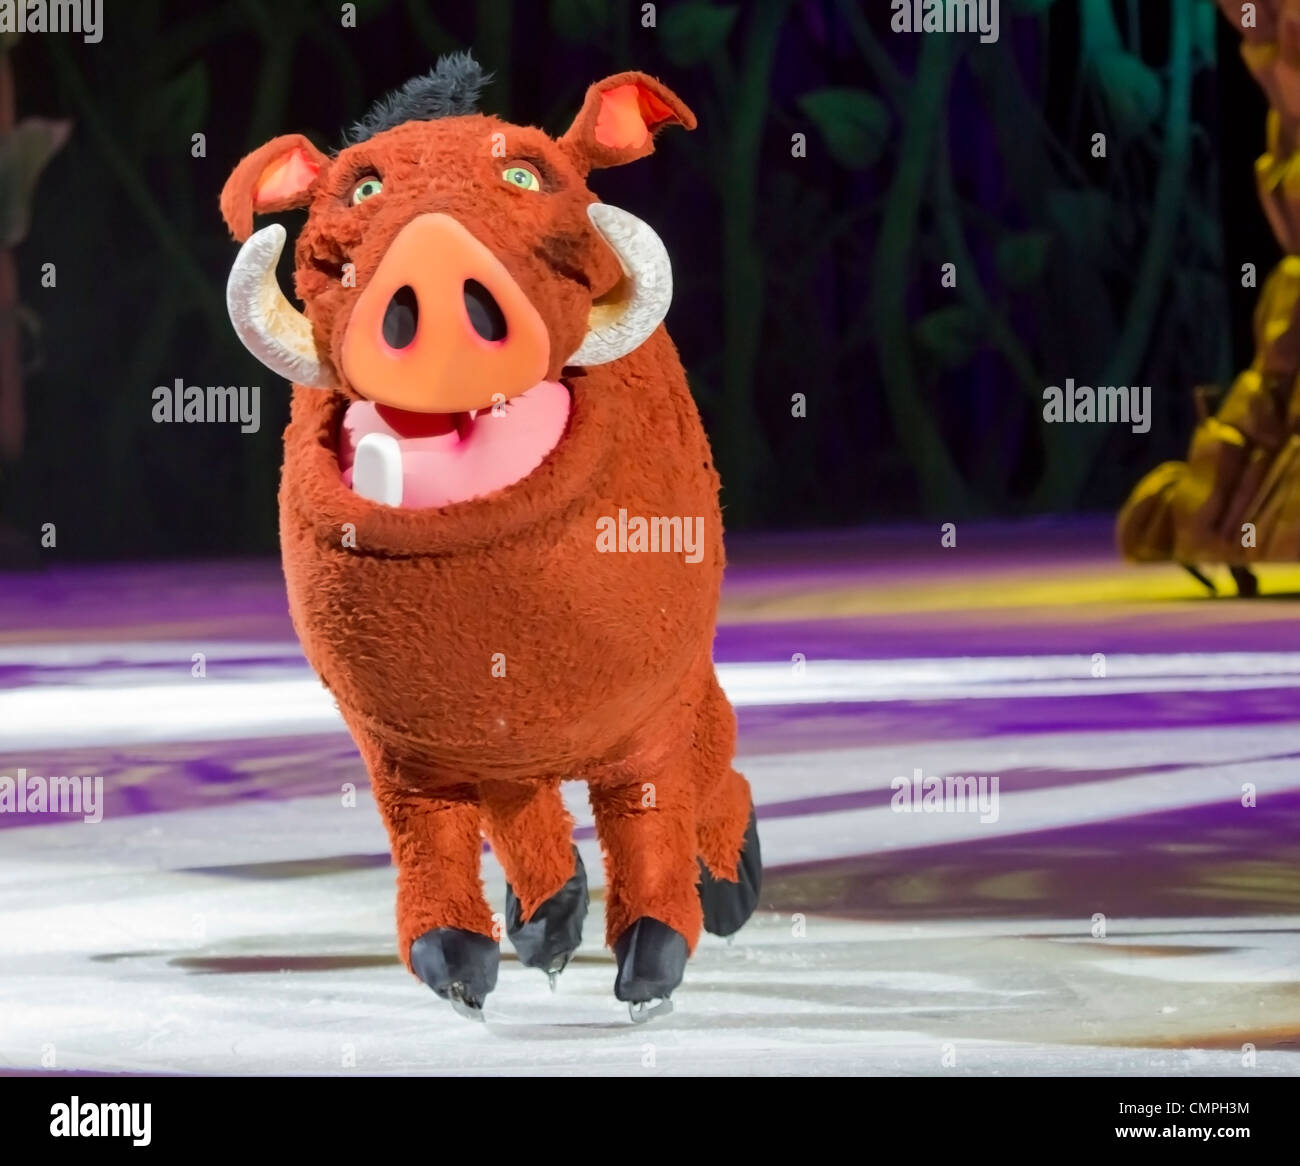 GREEN BAY, WI - MARCH 10: Pumbaa the warthog from The Lion King on skates at the Disney on Ice Treasure Trove show. Stock Photo